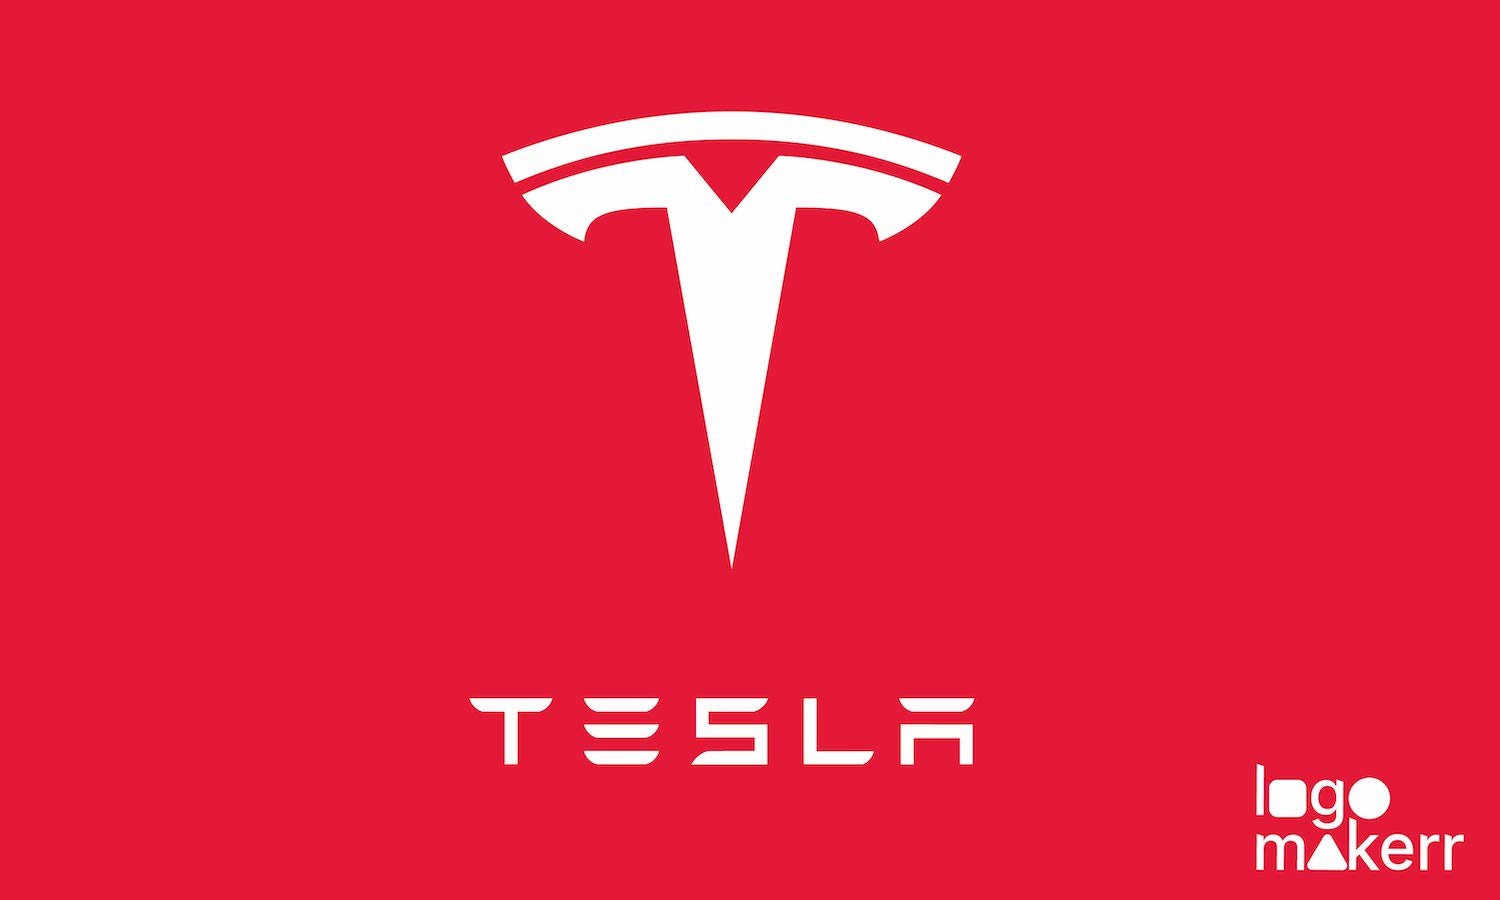 the tesla logo design with white font color placed in red background